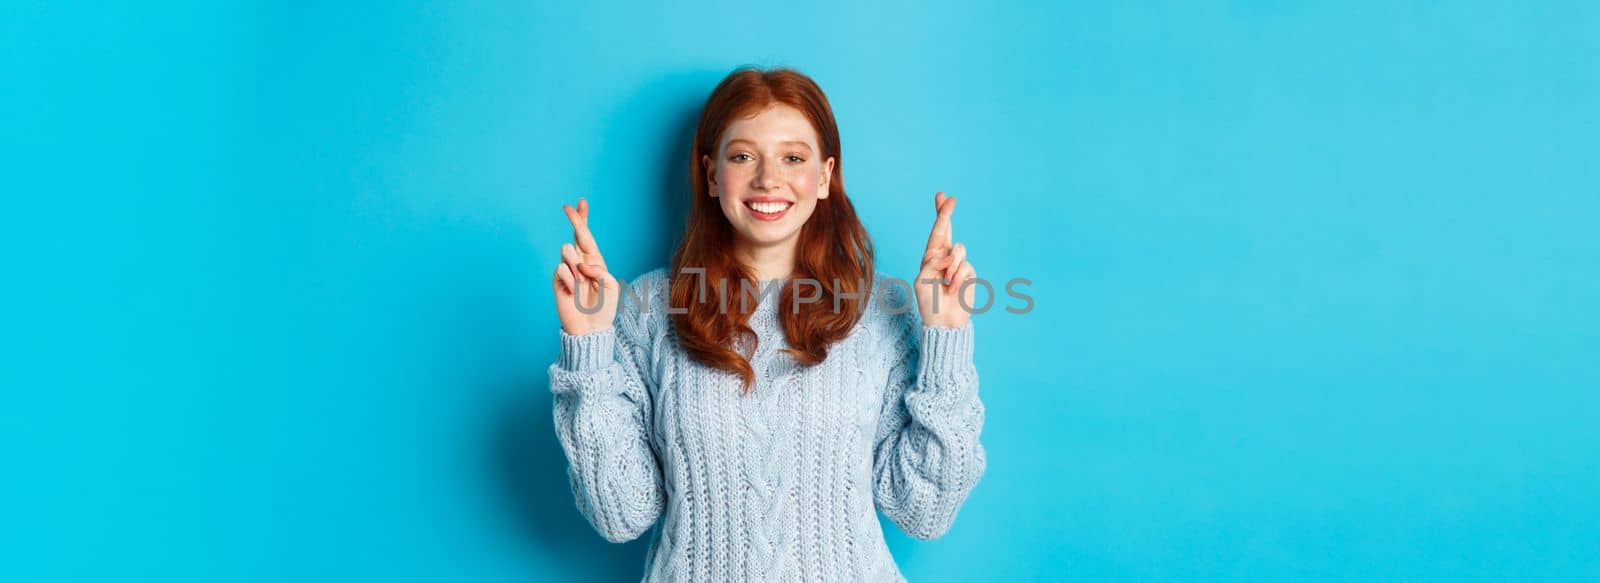 Hopeful redhead girl making a wish, cross fingers for good luck, smiling and anticipating good news or positive result, standing against blue background.